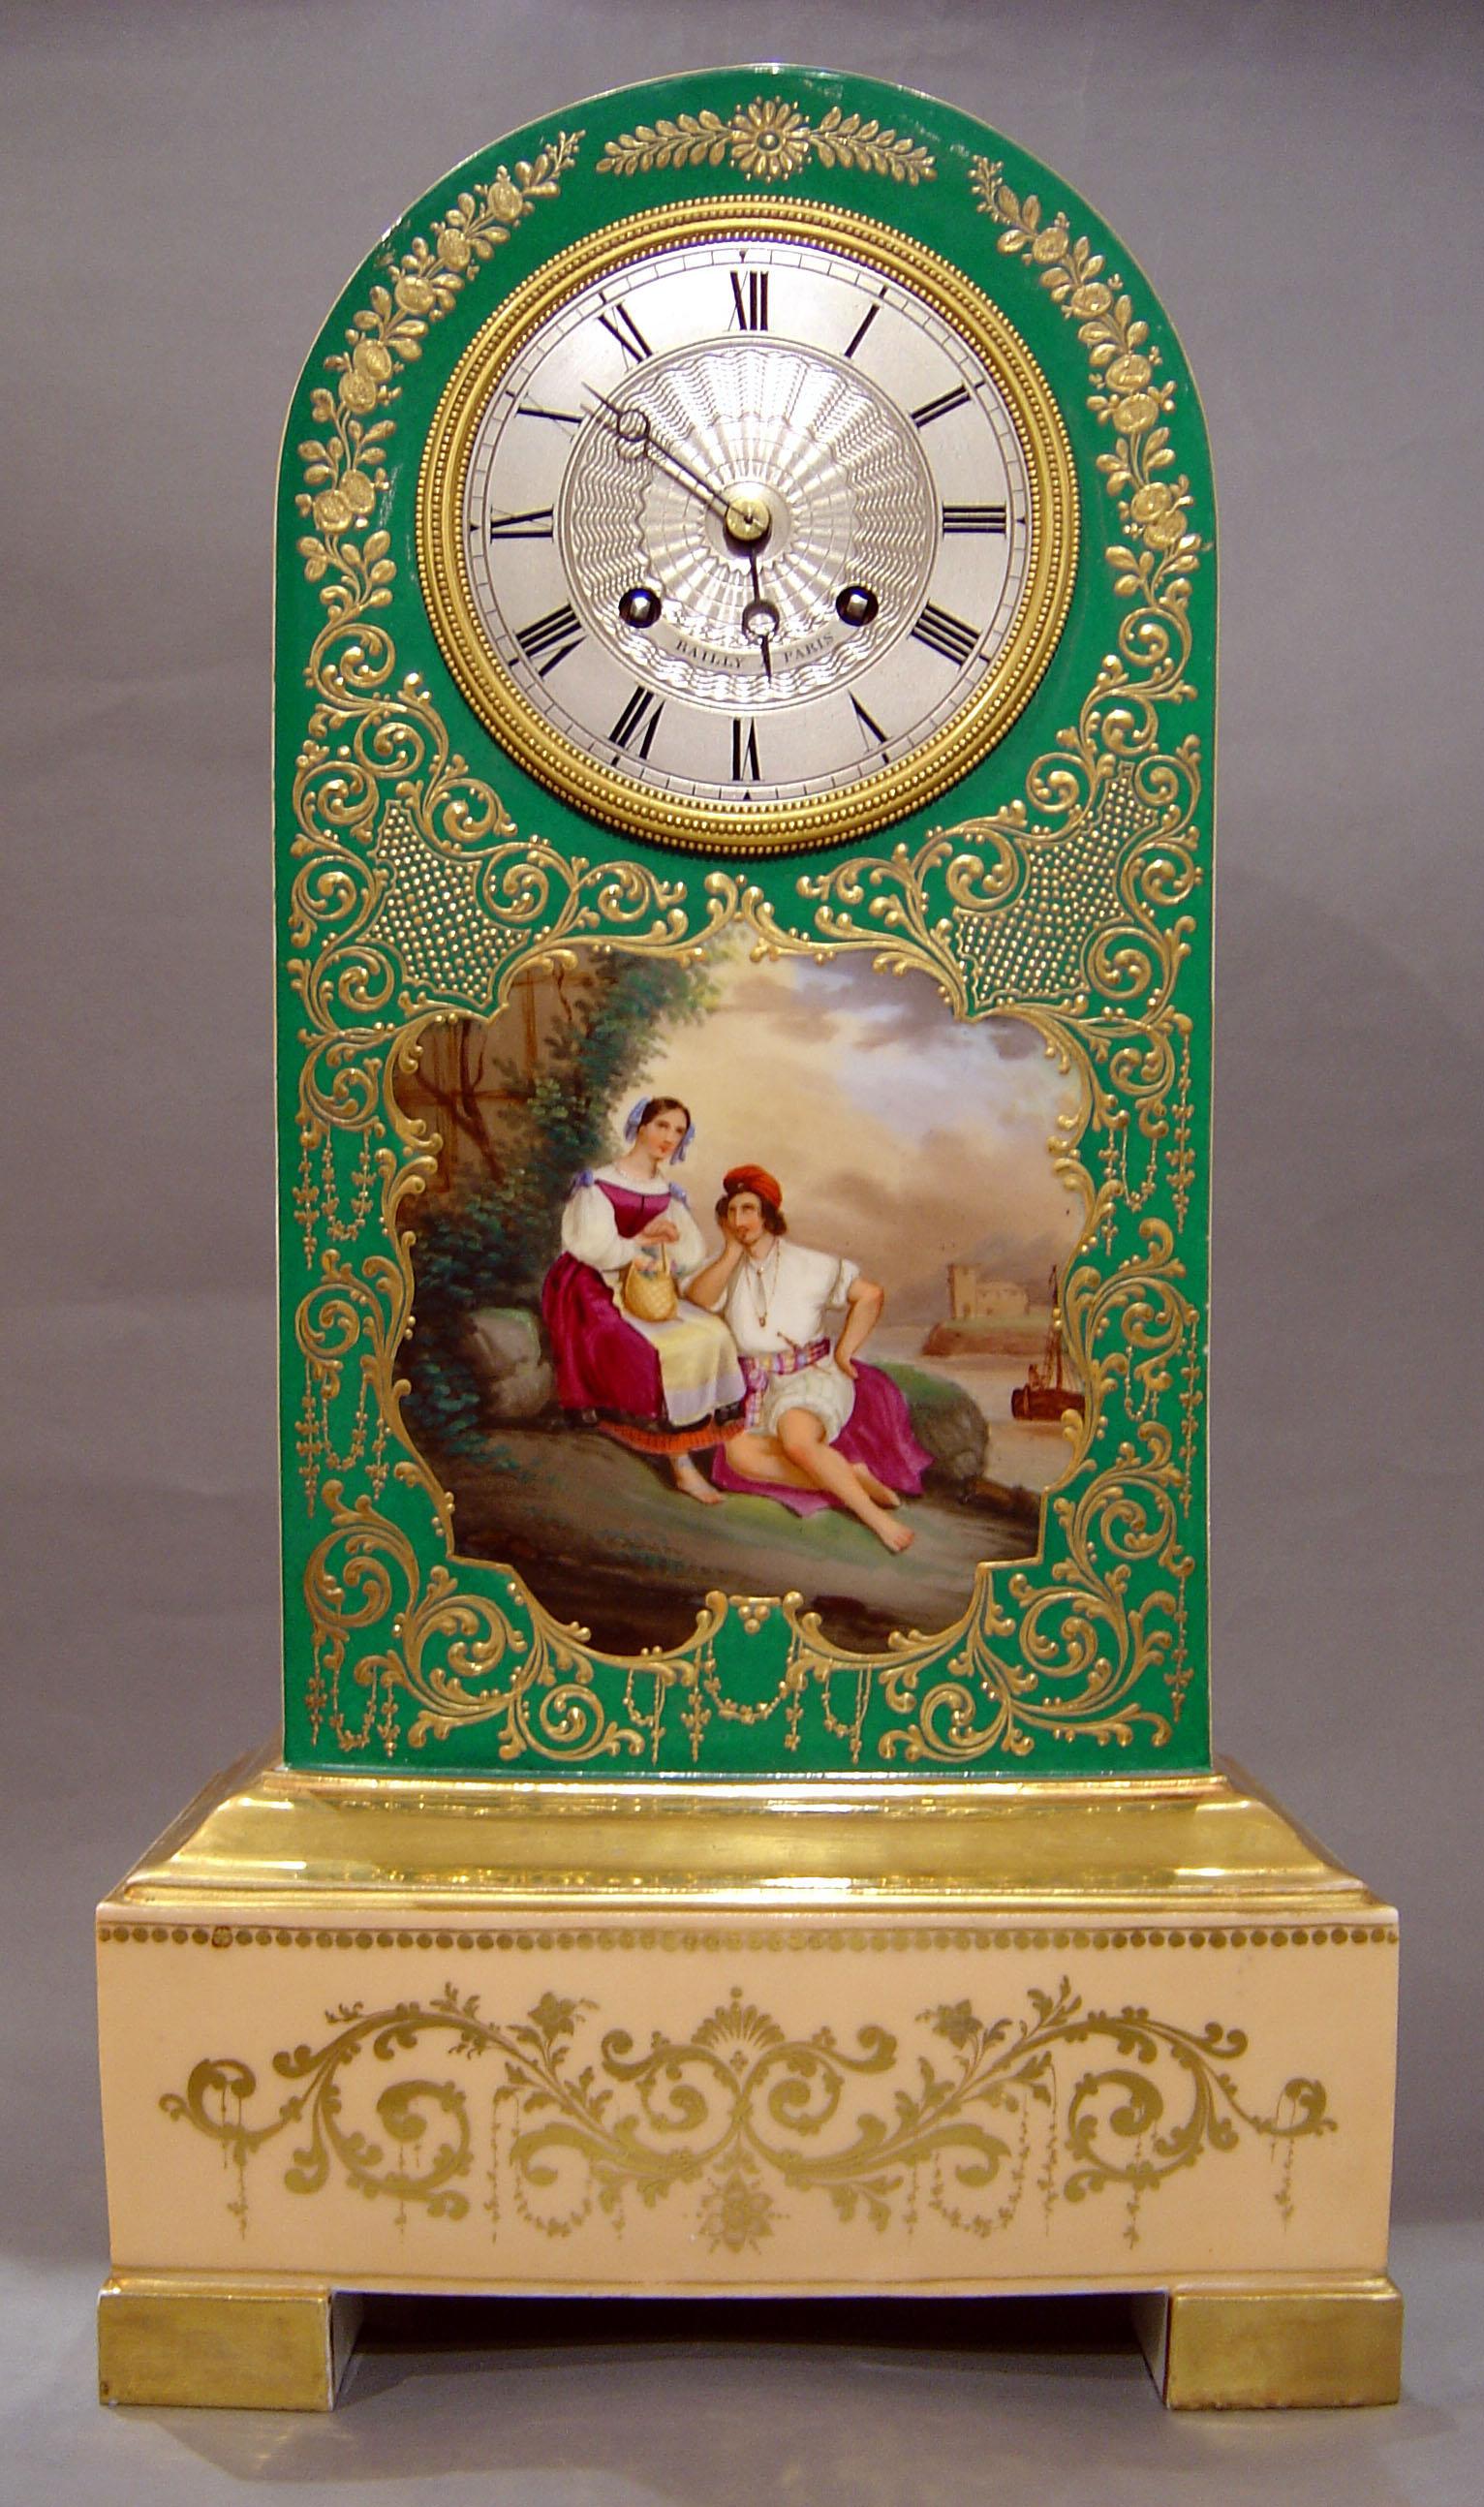 A most unusual Paris porcelain clock in the borne form from the Charles X period. Case probably by Jacob Petit with all over decoration in cream and fine giltwork. The plaque to the front with two figures in the foreground is a celebration of the